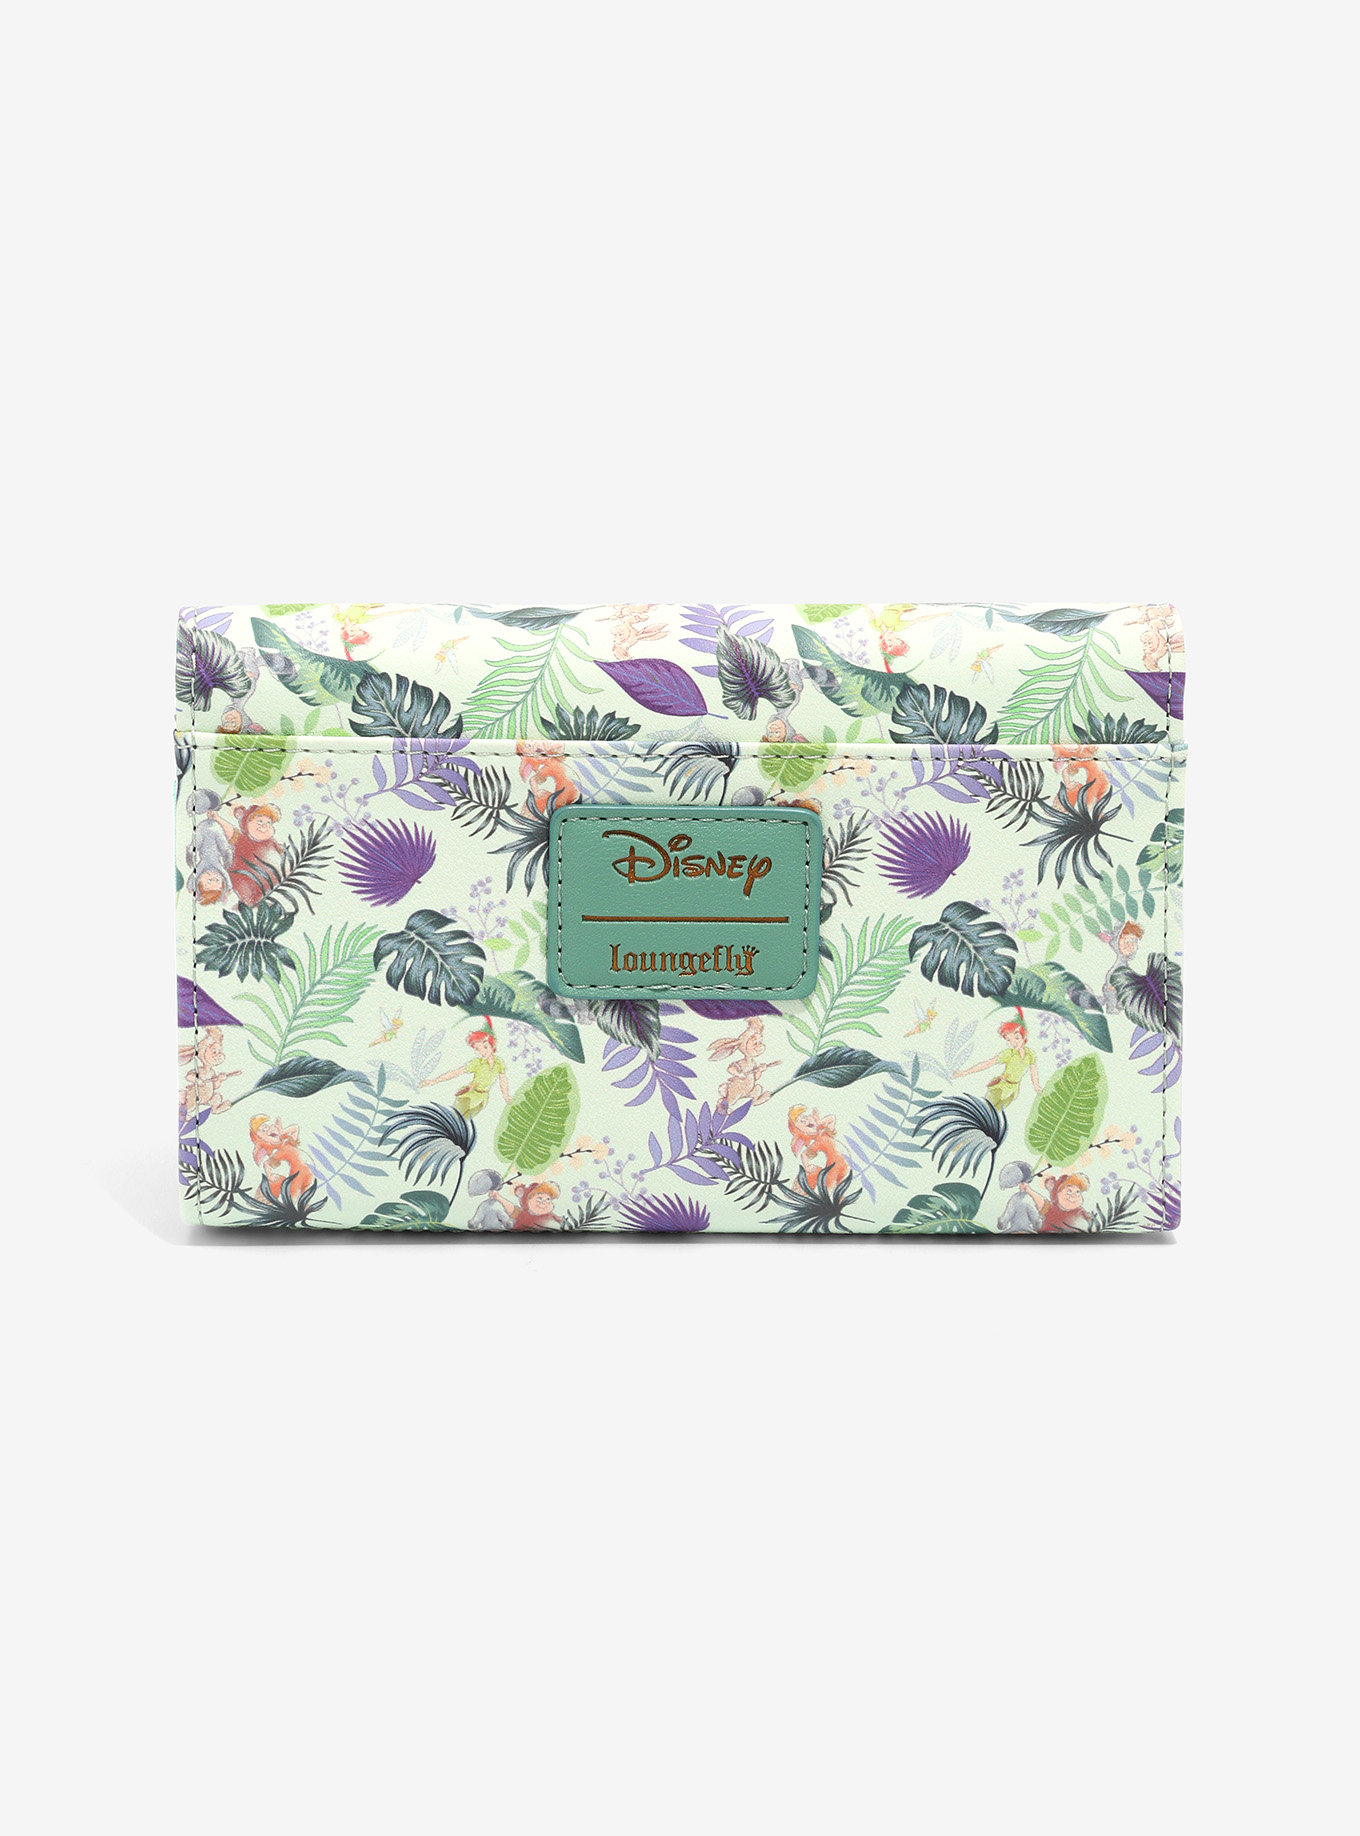 Peter Pan loungefly wallet